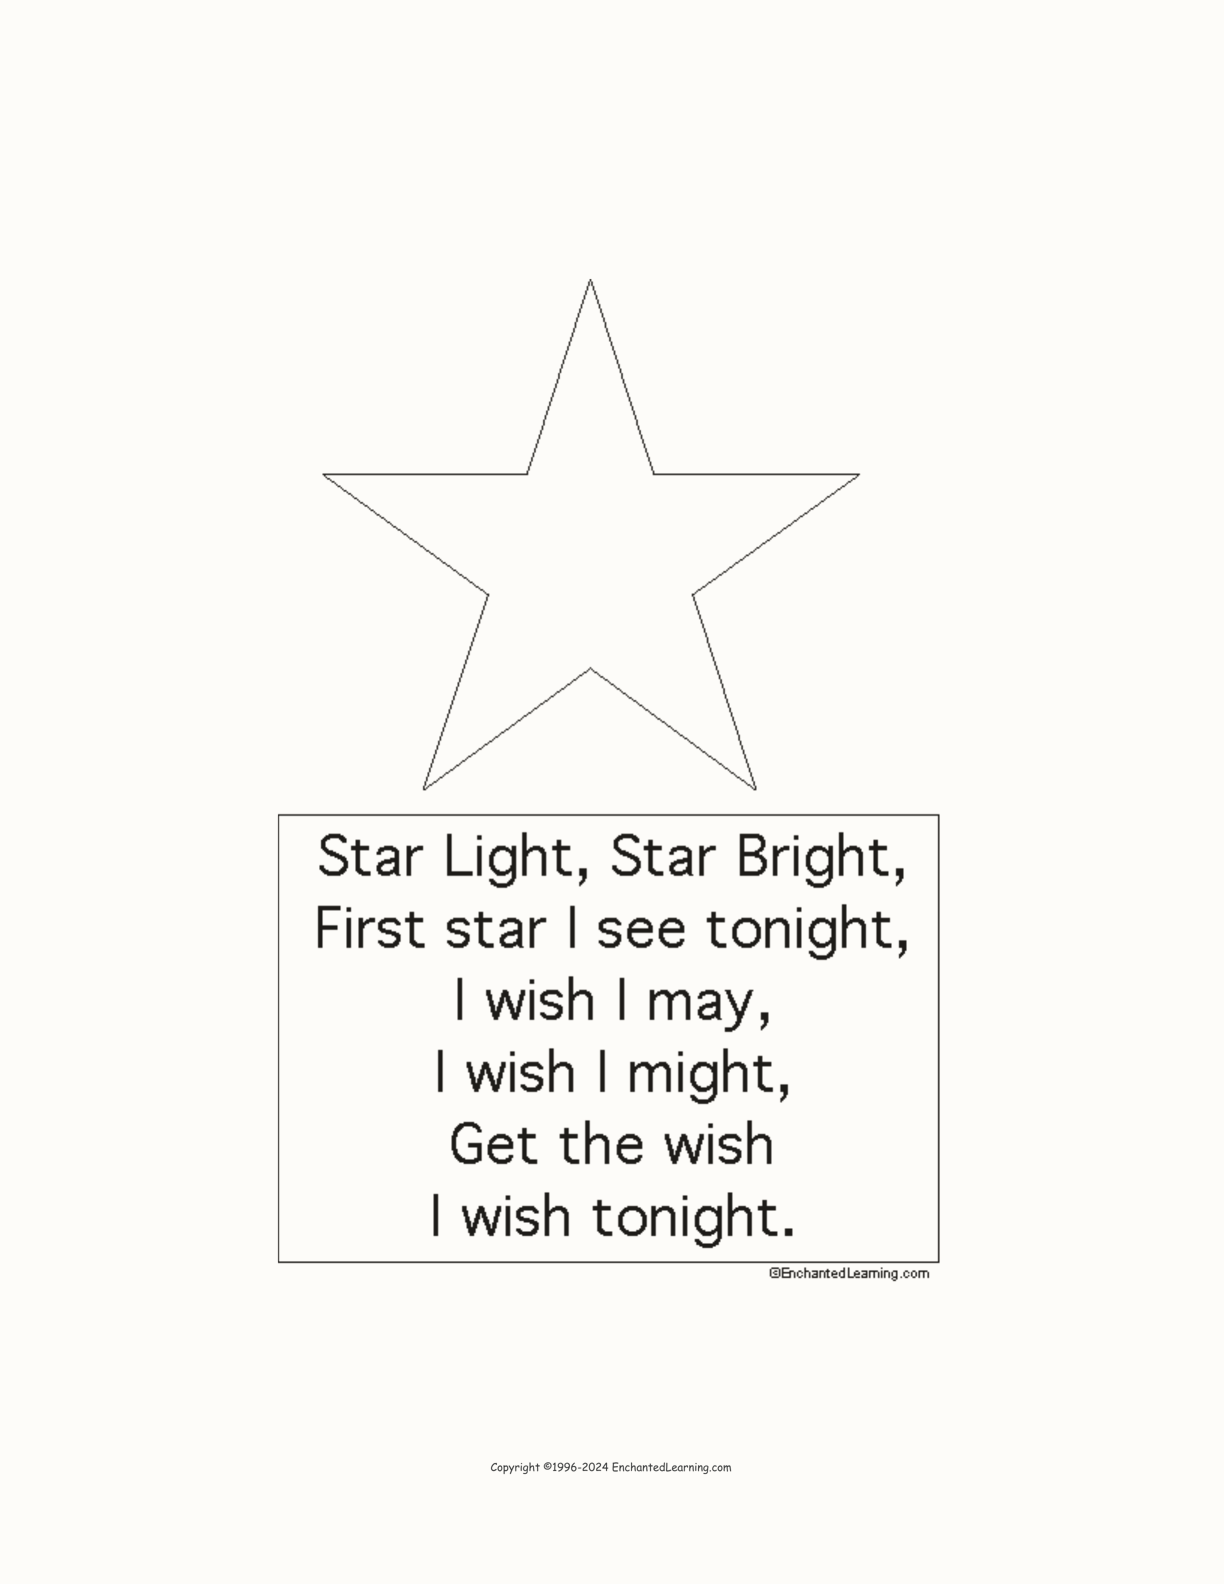 star-light-star-bright-template-enchanted-learning